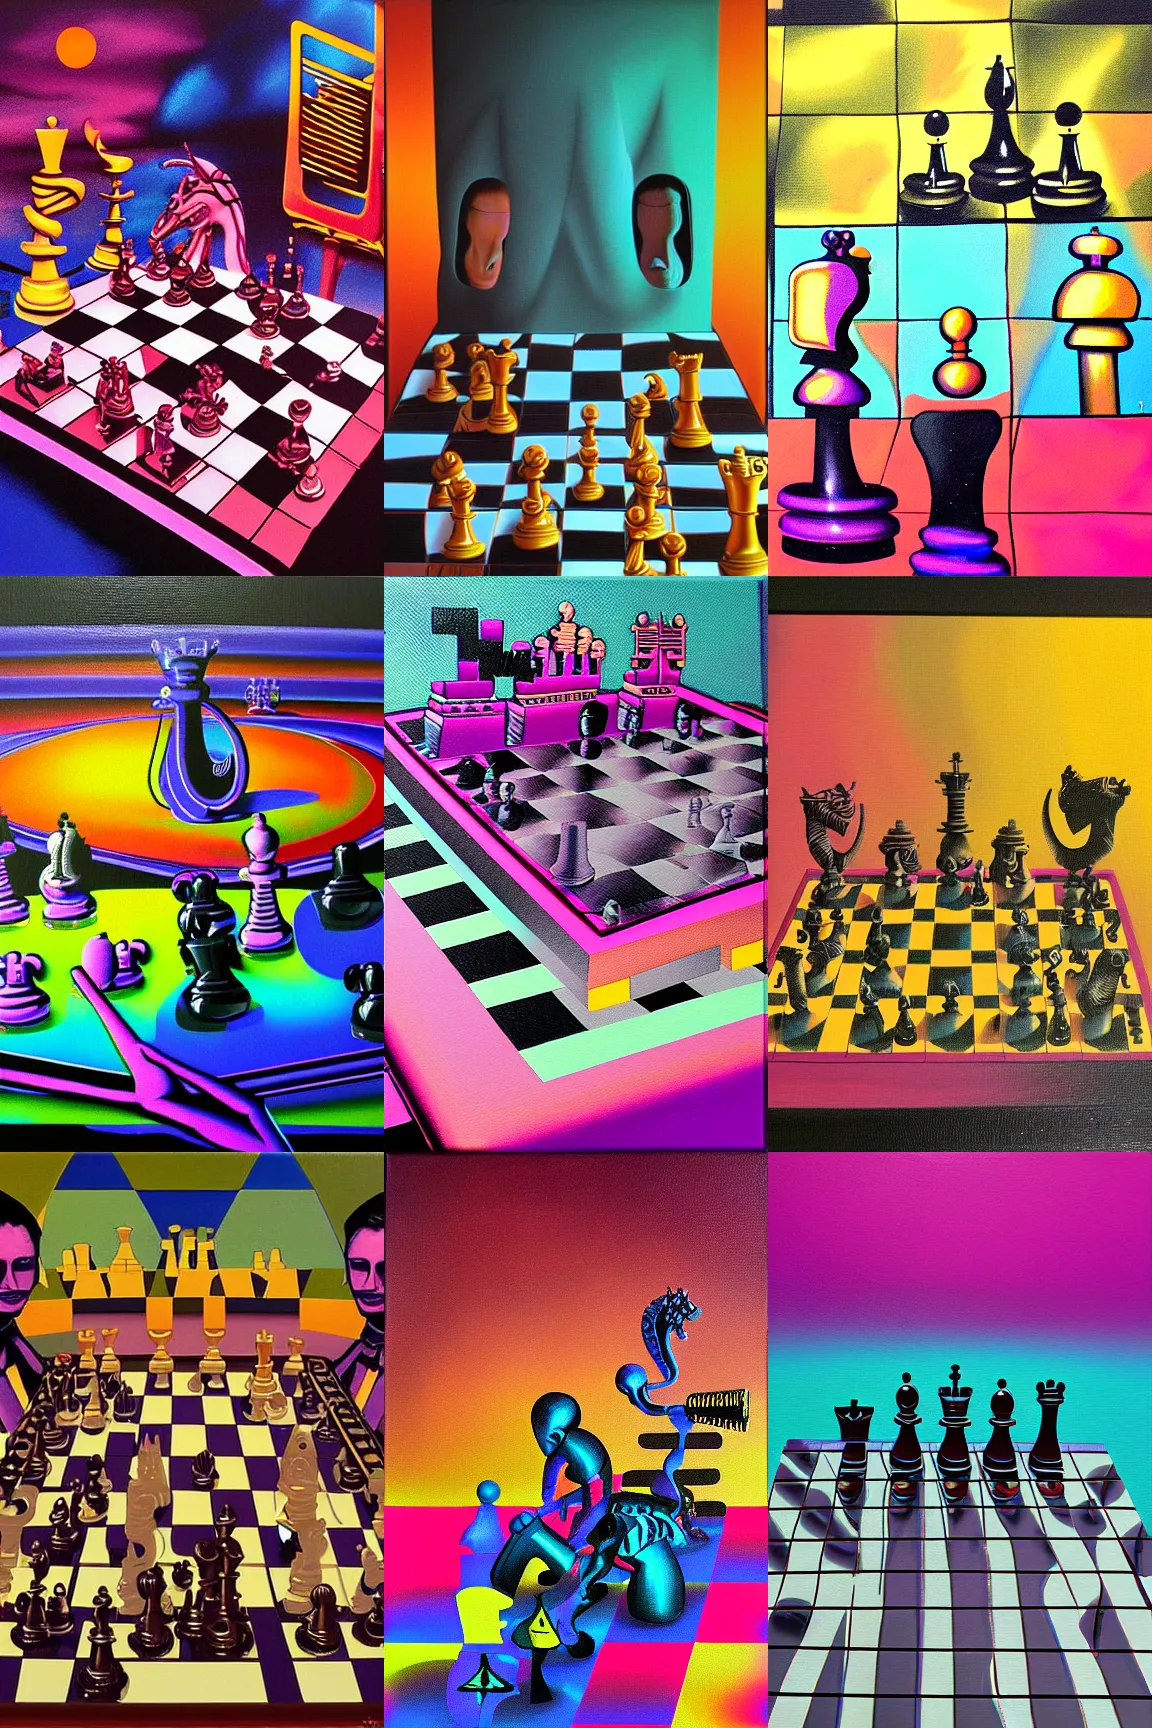 Download Chess 3D (Windows) - My Abandonware